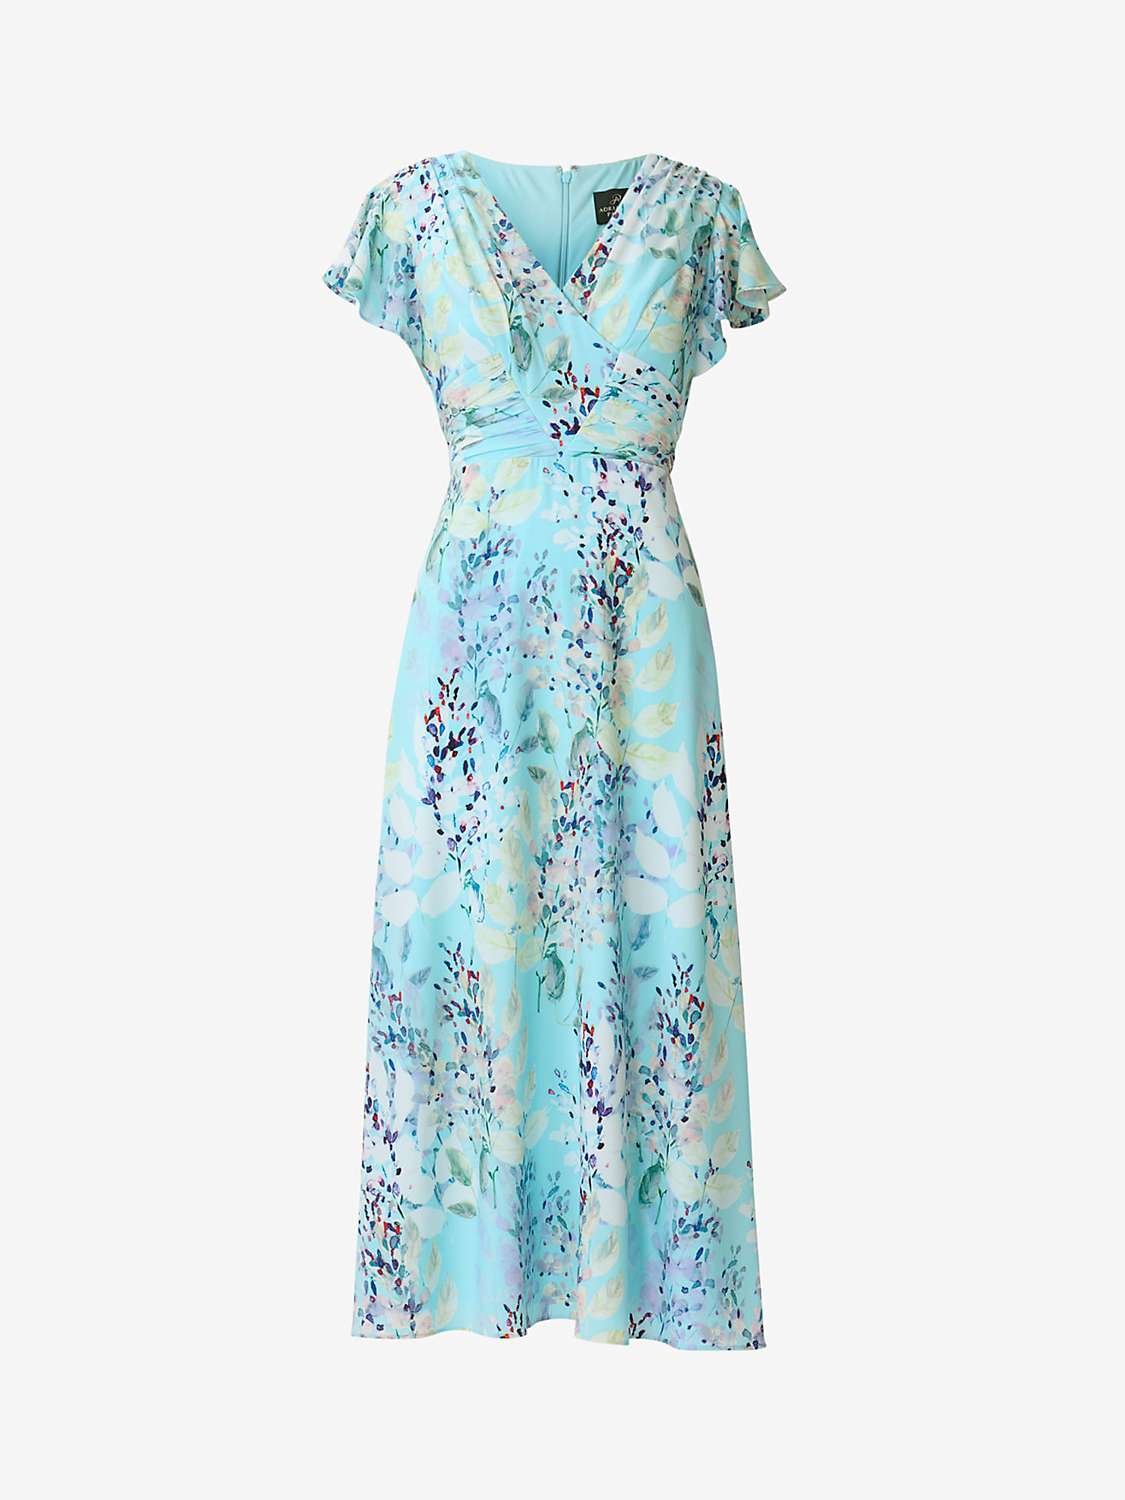 Buy Adrianna Papell Floral Printed Midi Dress, Light Blue Multi Online at johnlewis.com